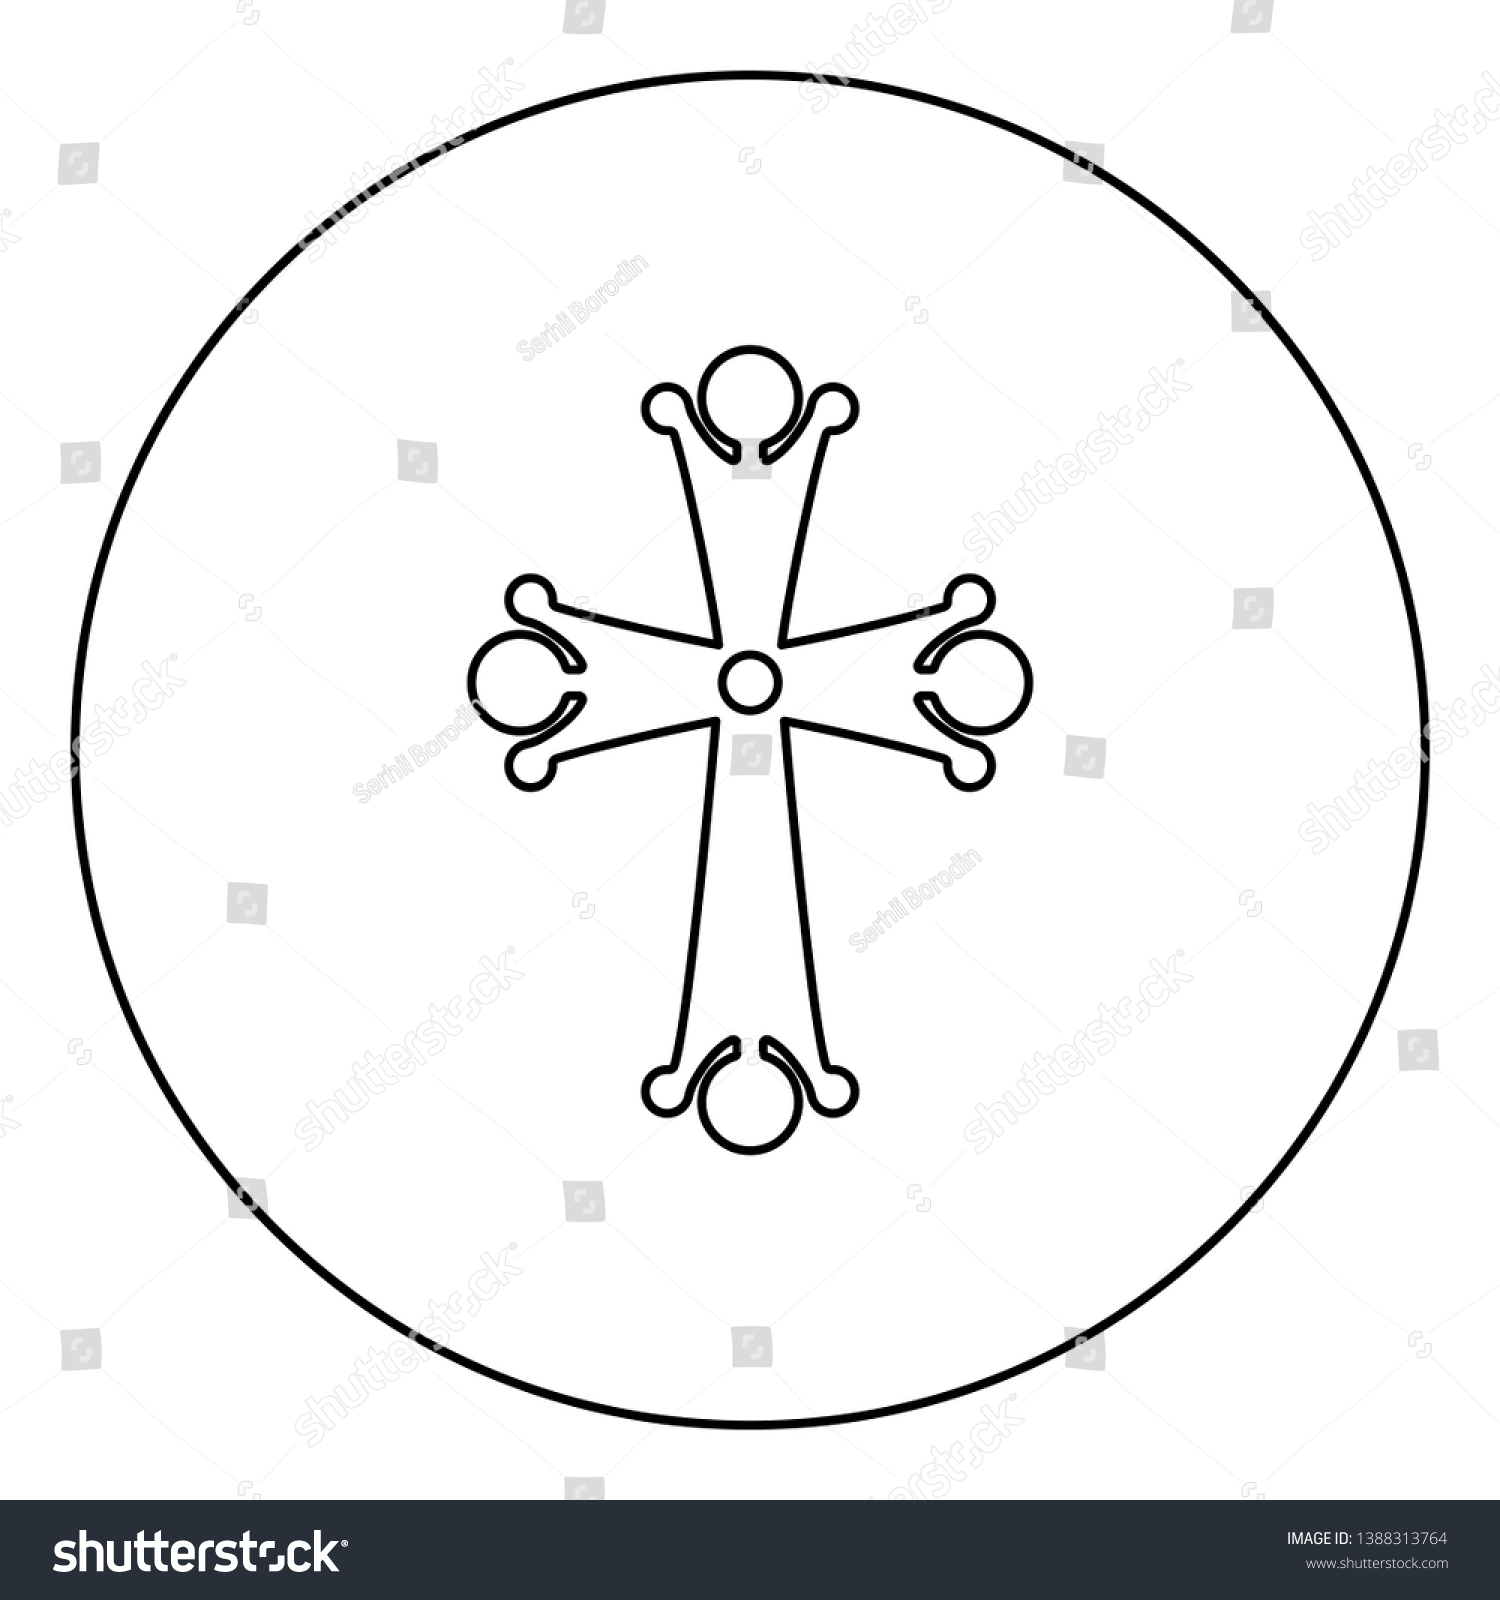 pointed cross outline